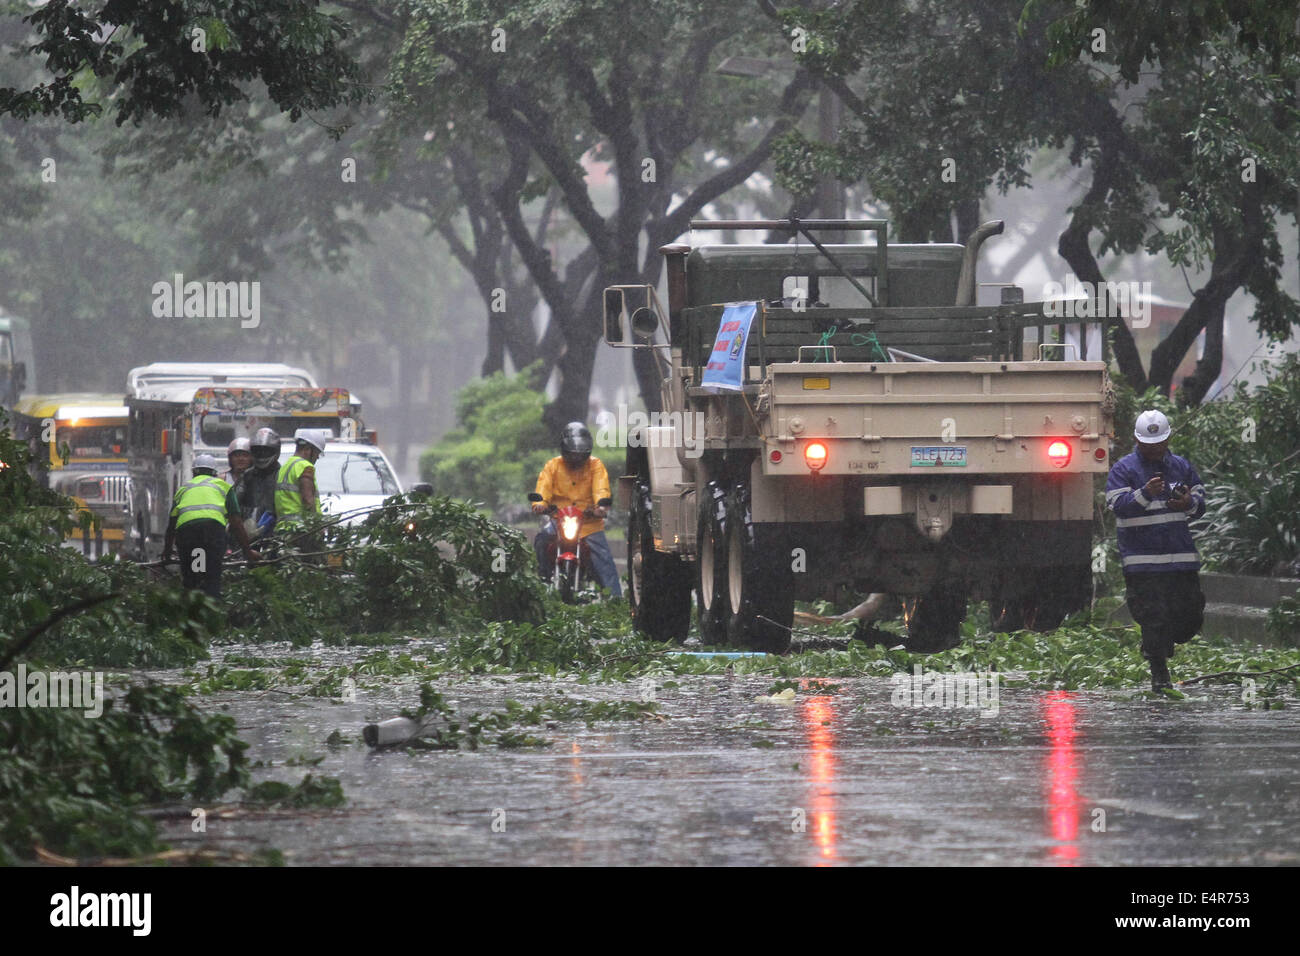 Manila, Philippines. 16th July, 2014. Rescue workers from the local government remove debris from the road as Typhoon Rammasun hit Metro Manila. Typhoon Rammasun (locally known as Glenda) had maximum sustained winds of 150 kph and gustiness of up to 185 kph when it hit Metro Manila. Across the country, about 400,000 people had fled their homes and sheltered in evacuation centers, according to the disaster management council. © PACIFIC PRESS/Alamy Live News Stock Photo